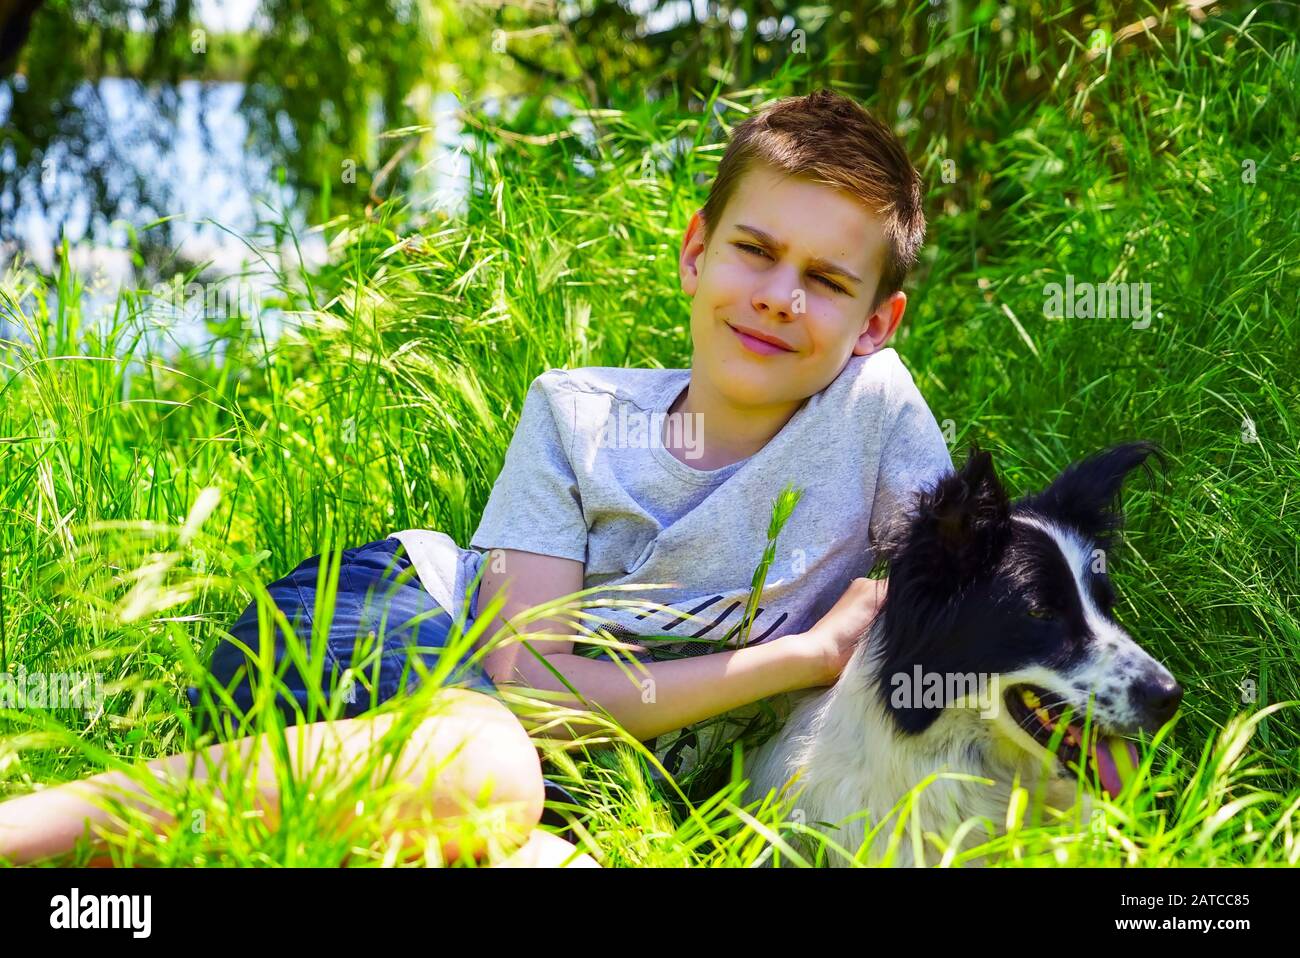 A boy sits on a green lawn and hugs a dog Stock Photo